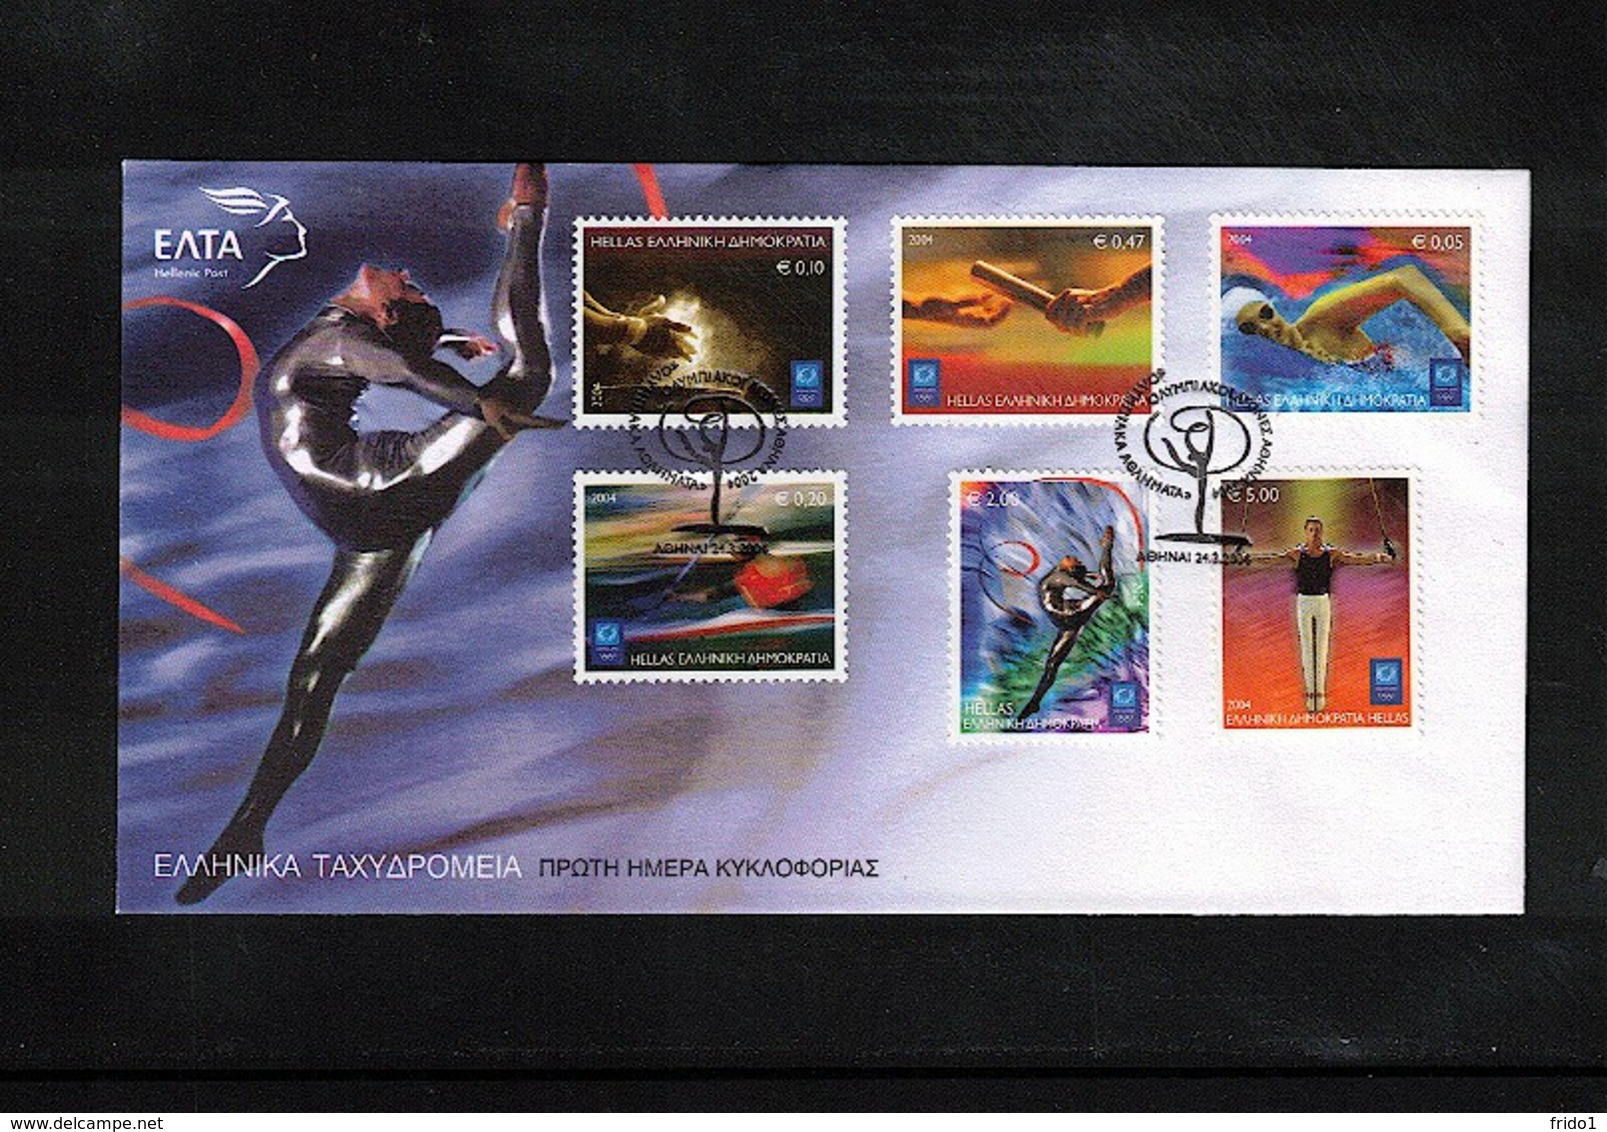 Greece / Griechenland 2004 Olympic Games Greece FDC - Sommer 2004: Athen